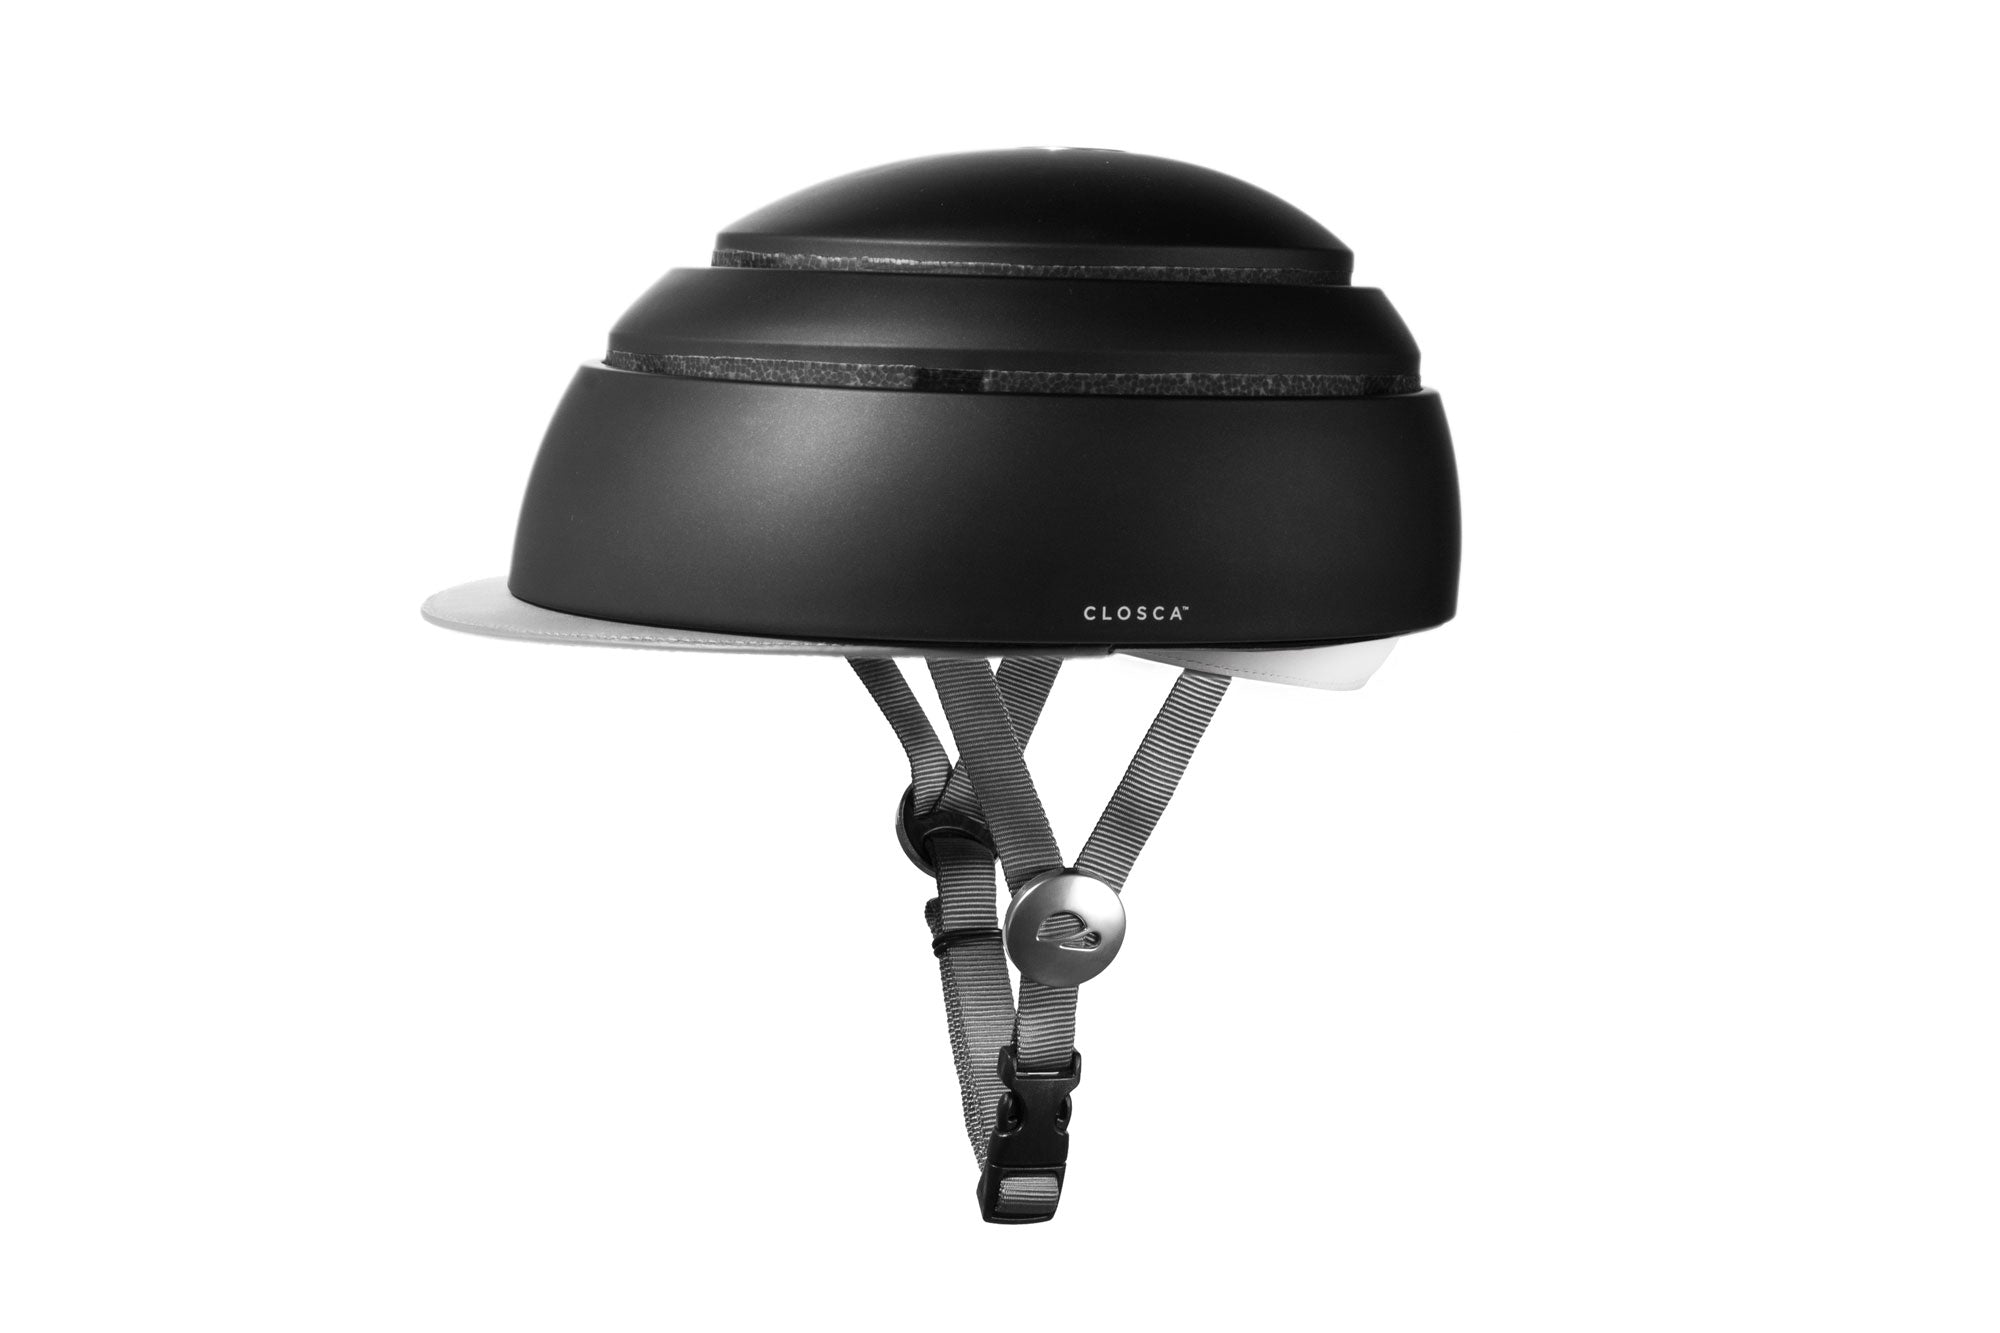 Closca Helmet is one of the 37 Gorgeous Gifts for the Home (NY MAGAZINE)